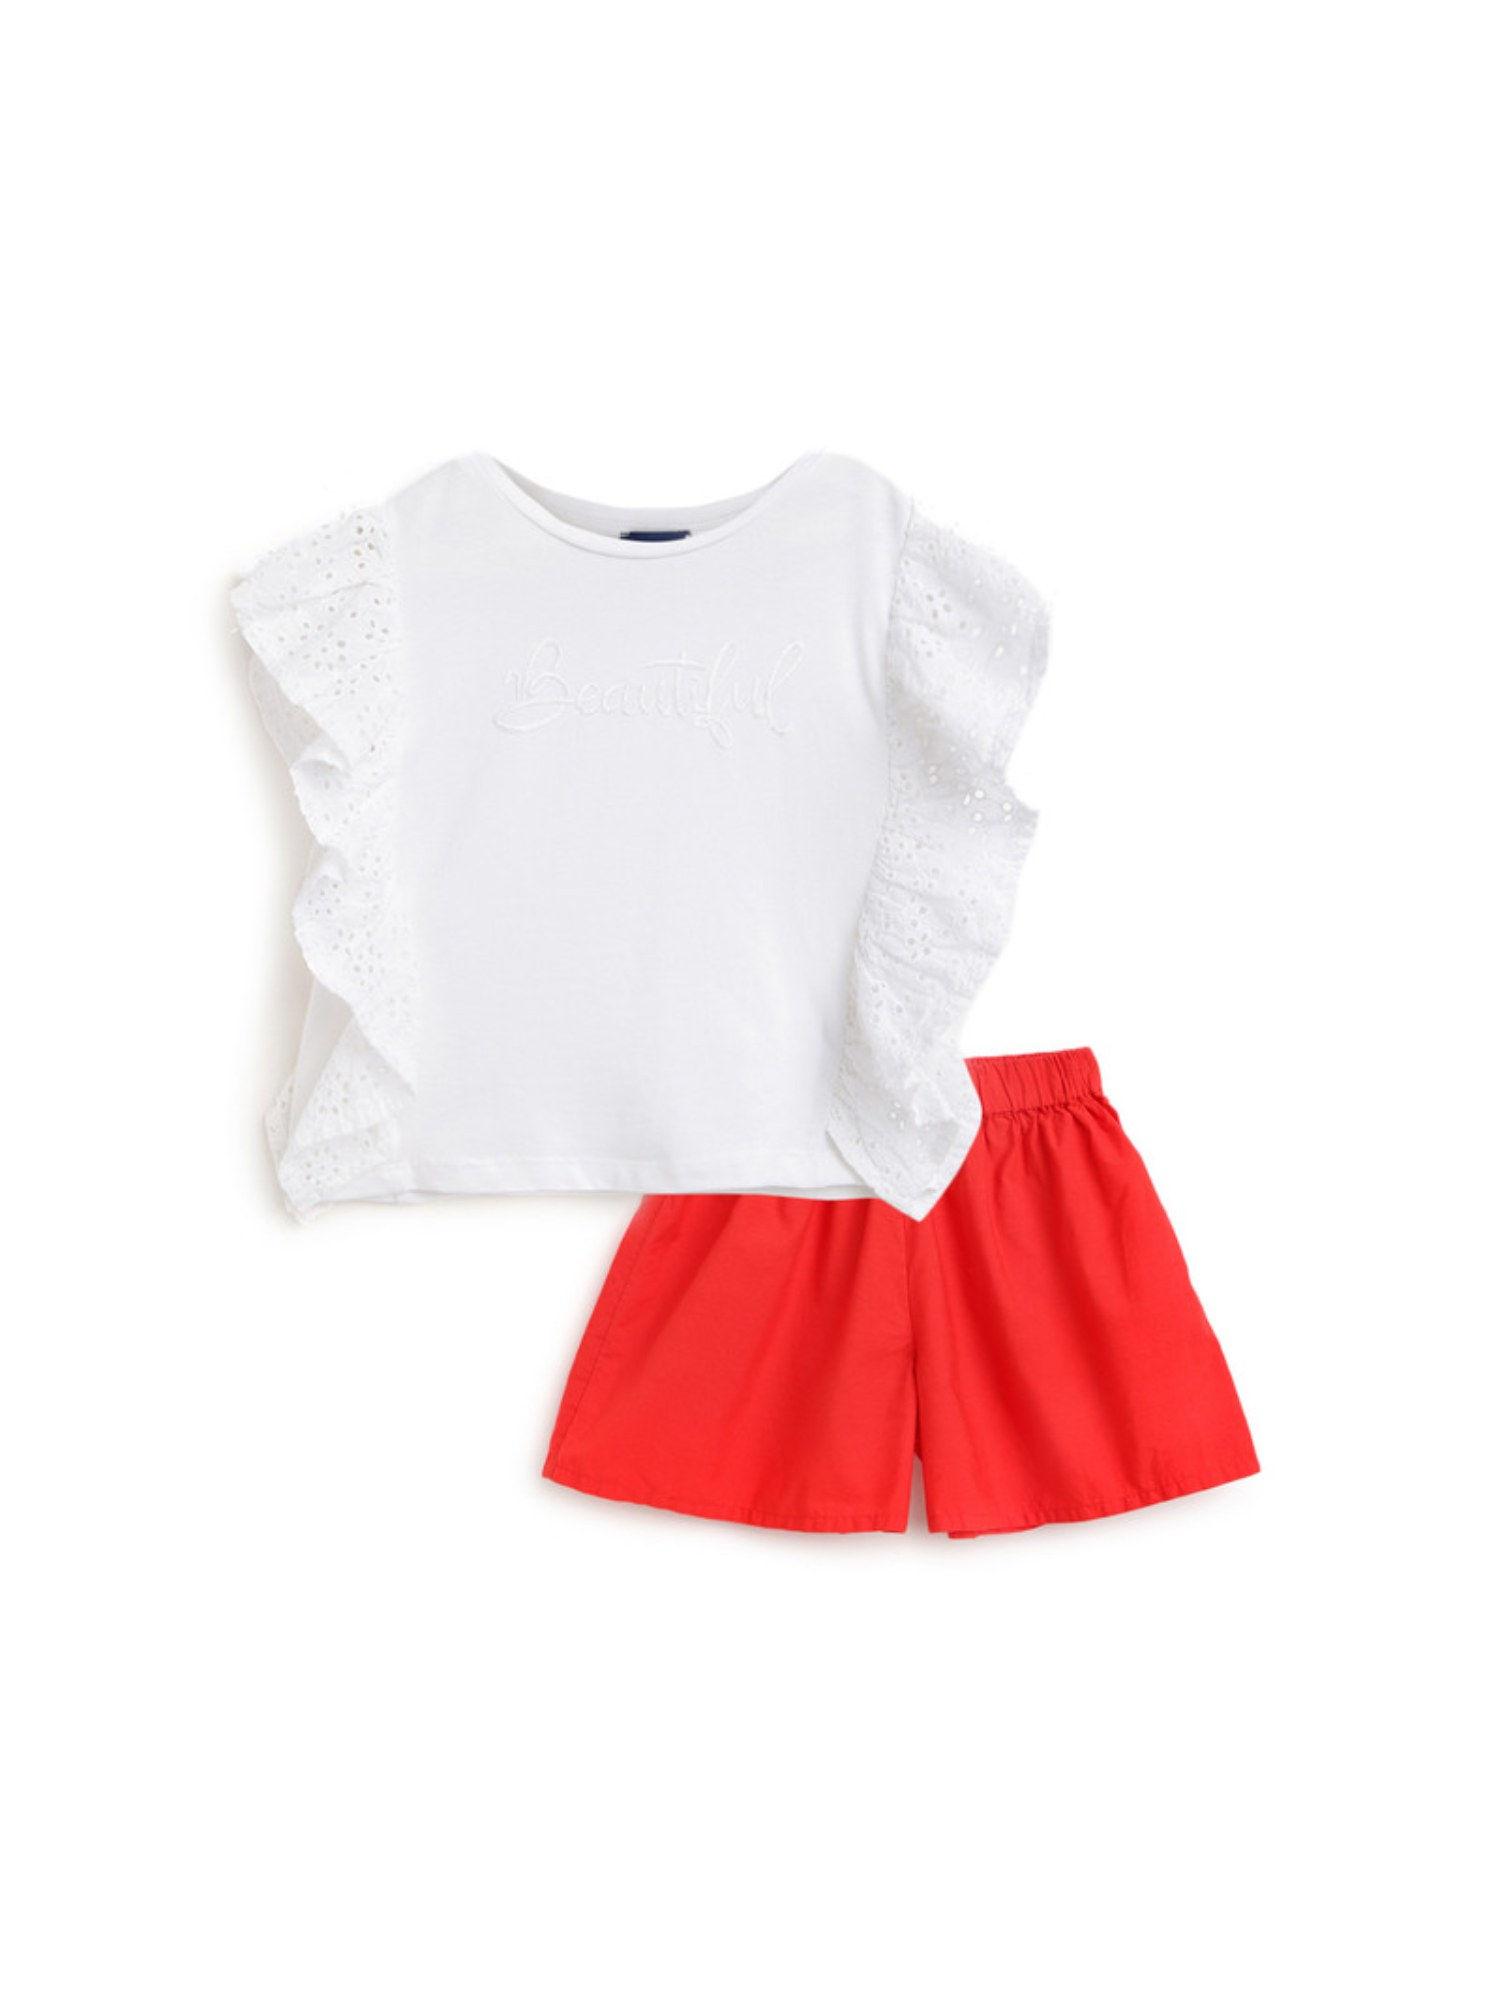 girls white top with red shorts knitted (set of 2)